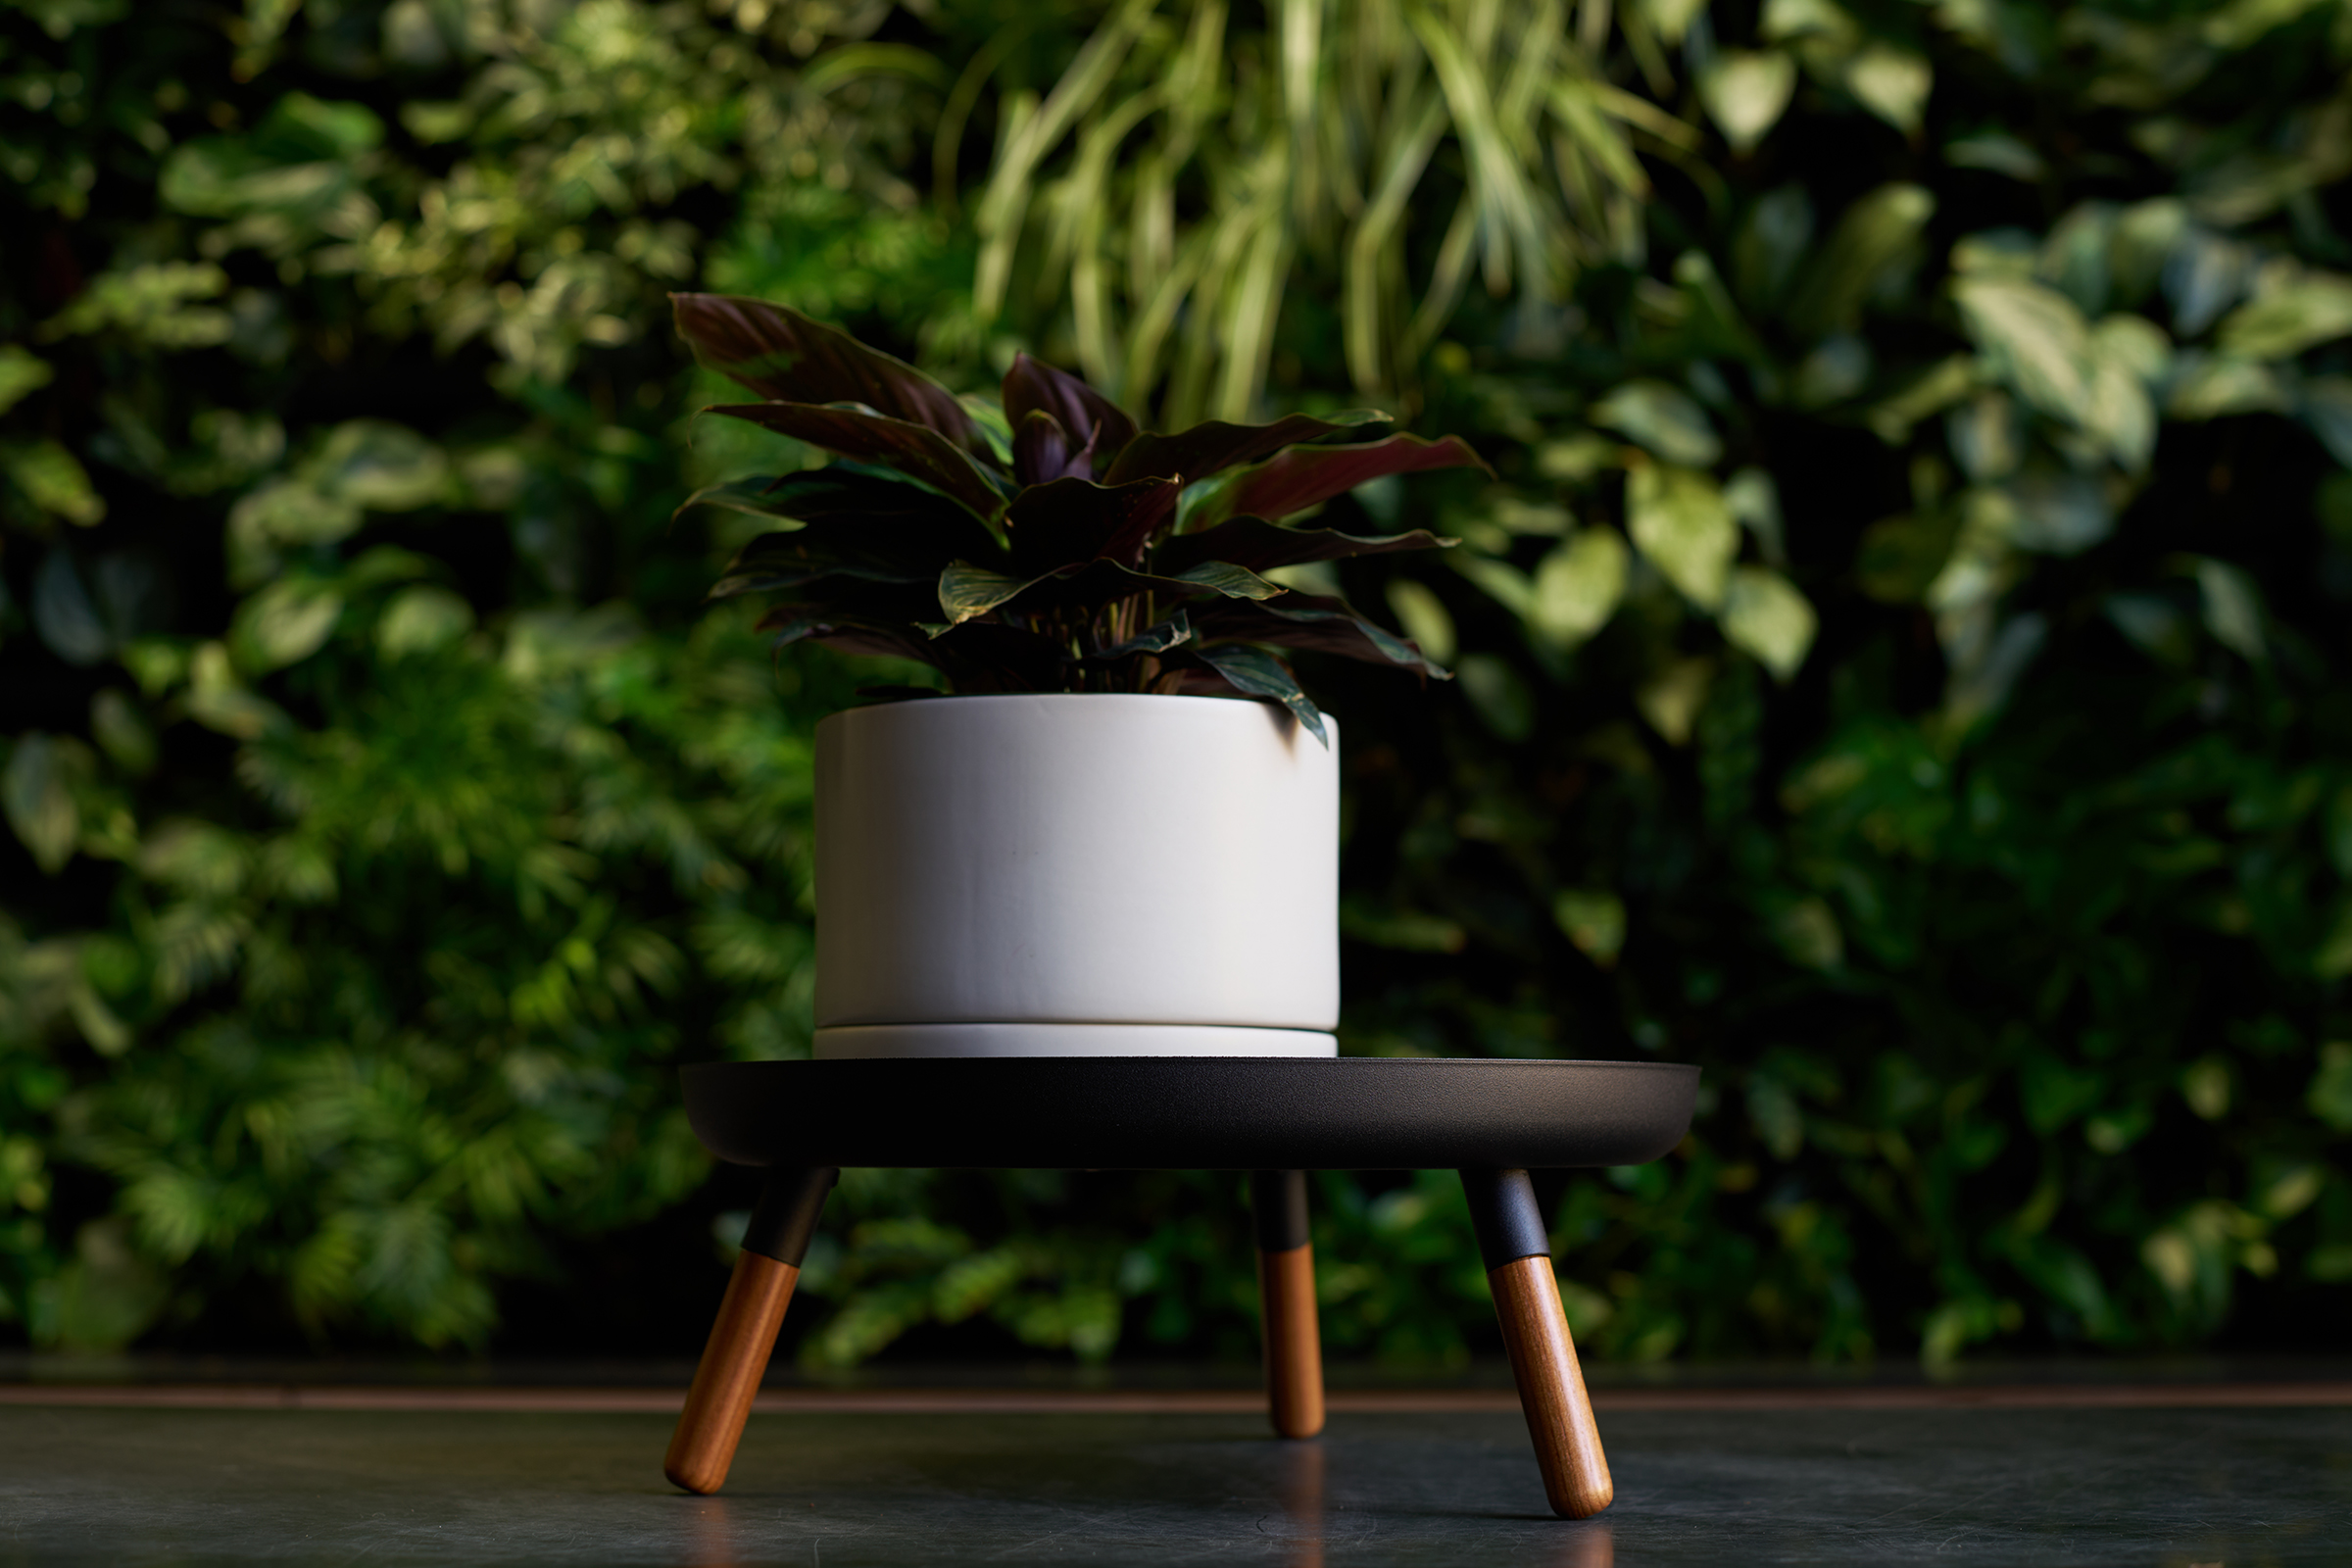 Greenery Unlimited's Franklin 17 Self Watering Planter in Cloud with a plant inside, sitting atop Yamazaki Home's Countertop Pedestal Tray by Yamazaki Home in black.